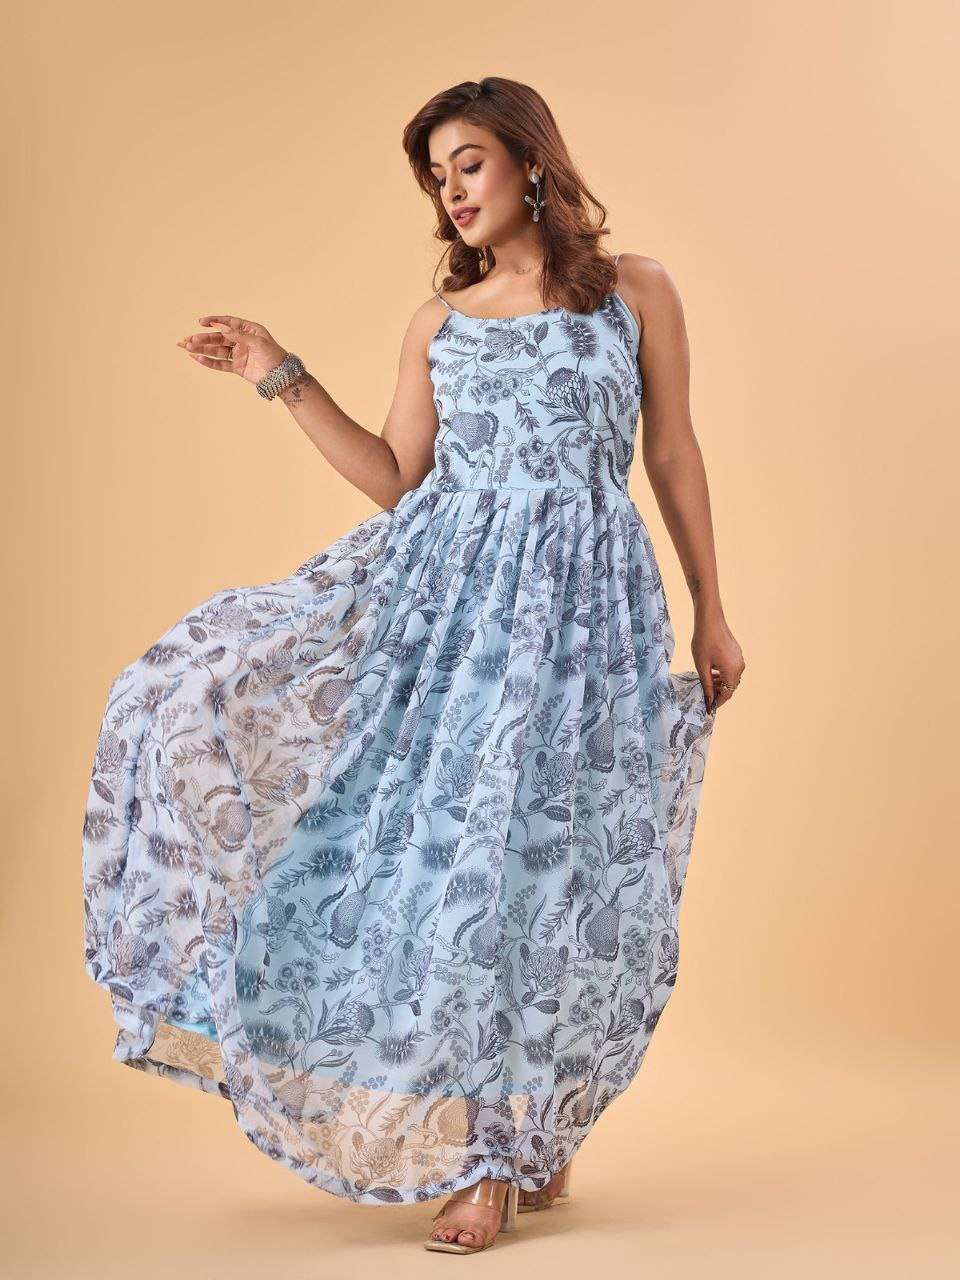 MC-1023 BY ASLIWHOLESALE DESIGNER FACNY GEORGETTE PRINTED GOWNS